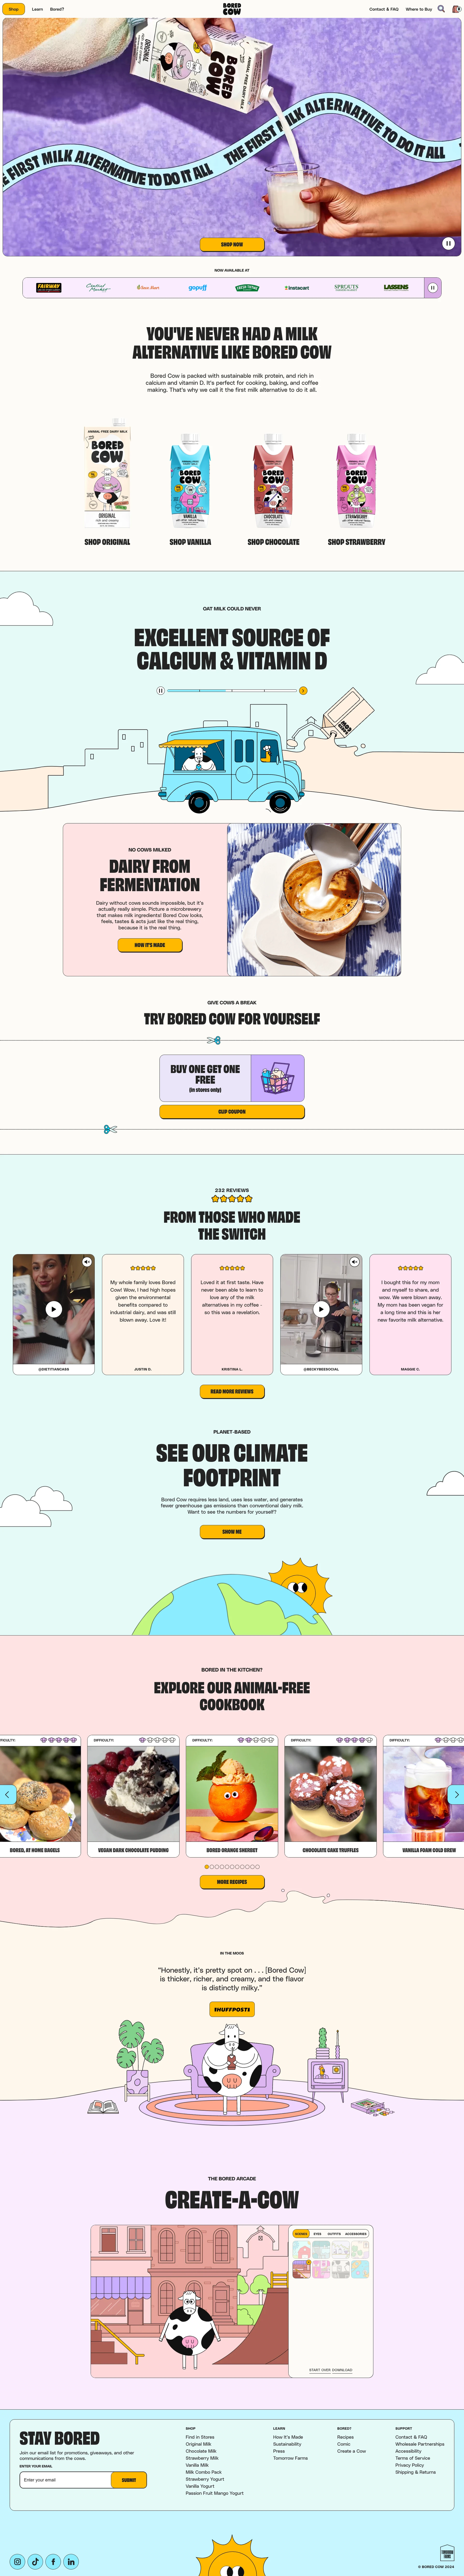 Bored Cow Landing Page Example: Looking for a better milk alternative? Bored Cow looks, feels, tastes, and acts just like dairy. The difference? Ours is lactose free, cholesterol free, and cruelty free. Did we mention it's packed with protein, calcium, and vitamins too? Give cows a break!